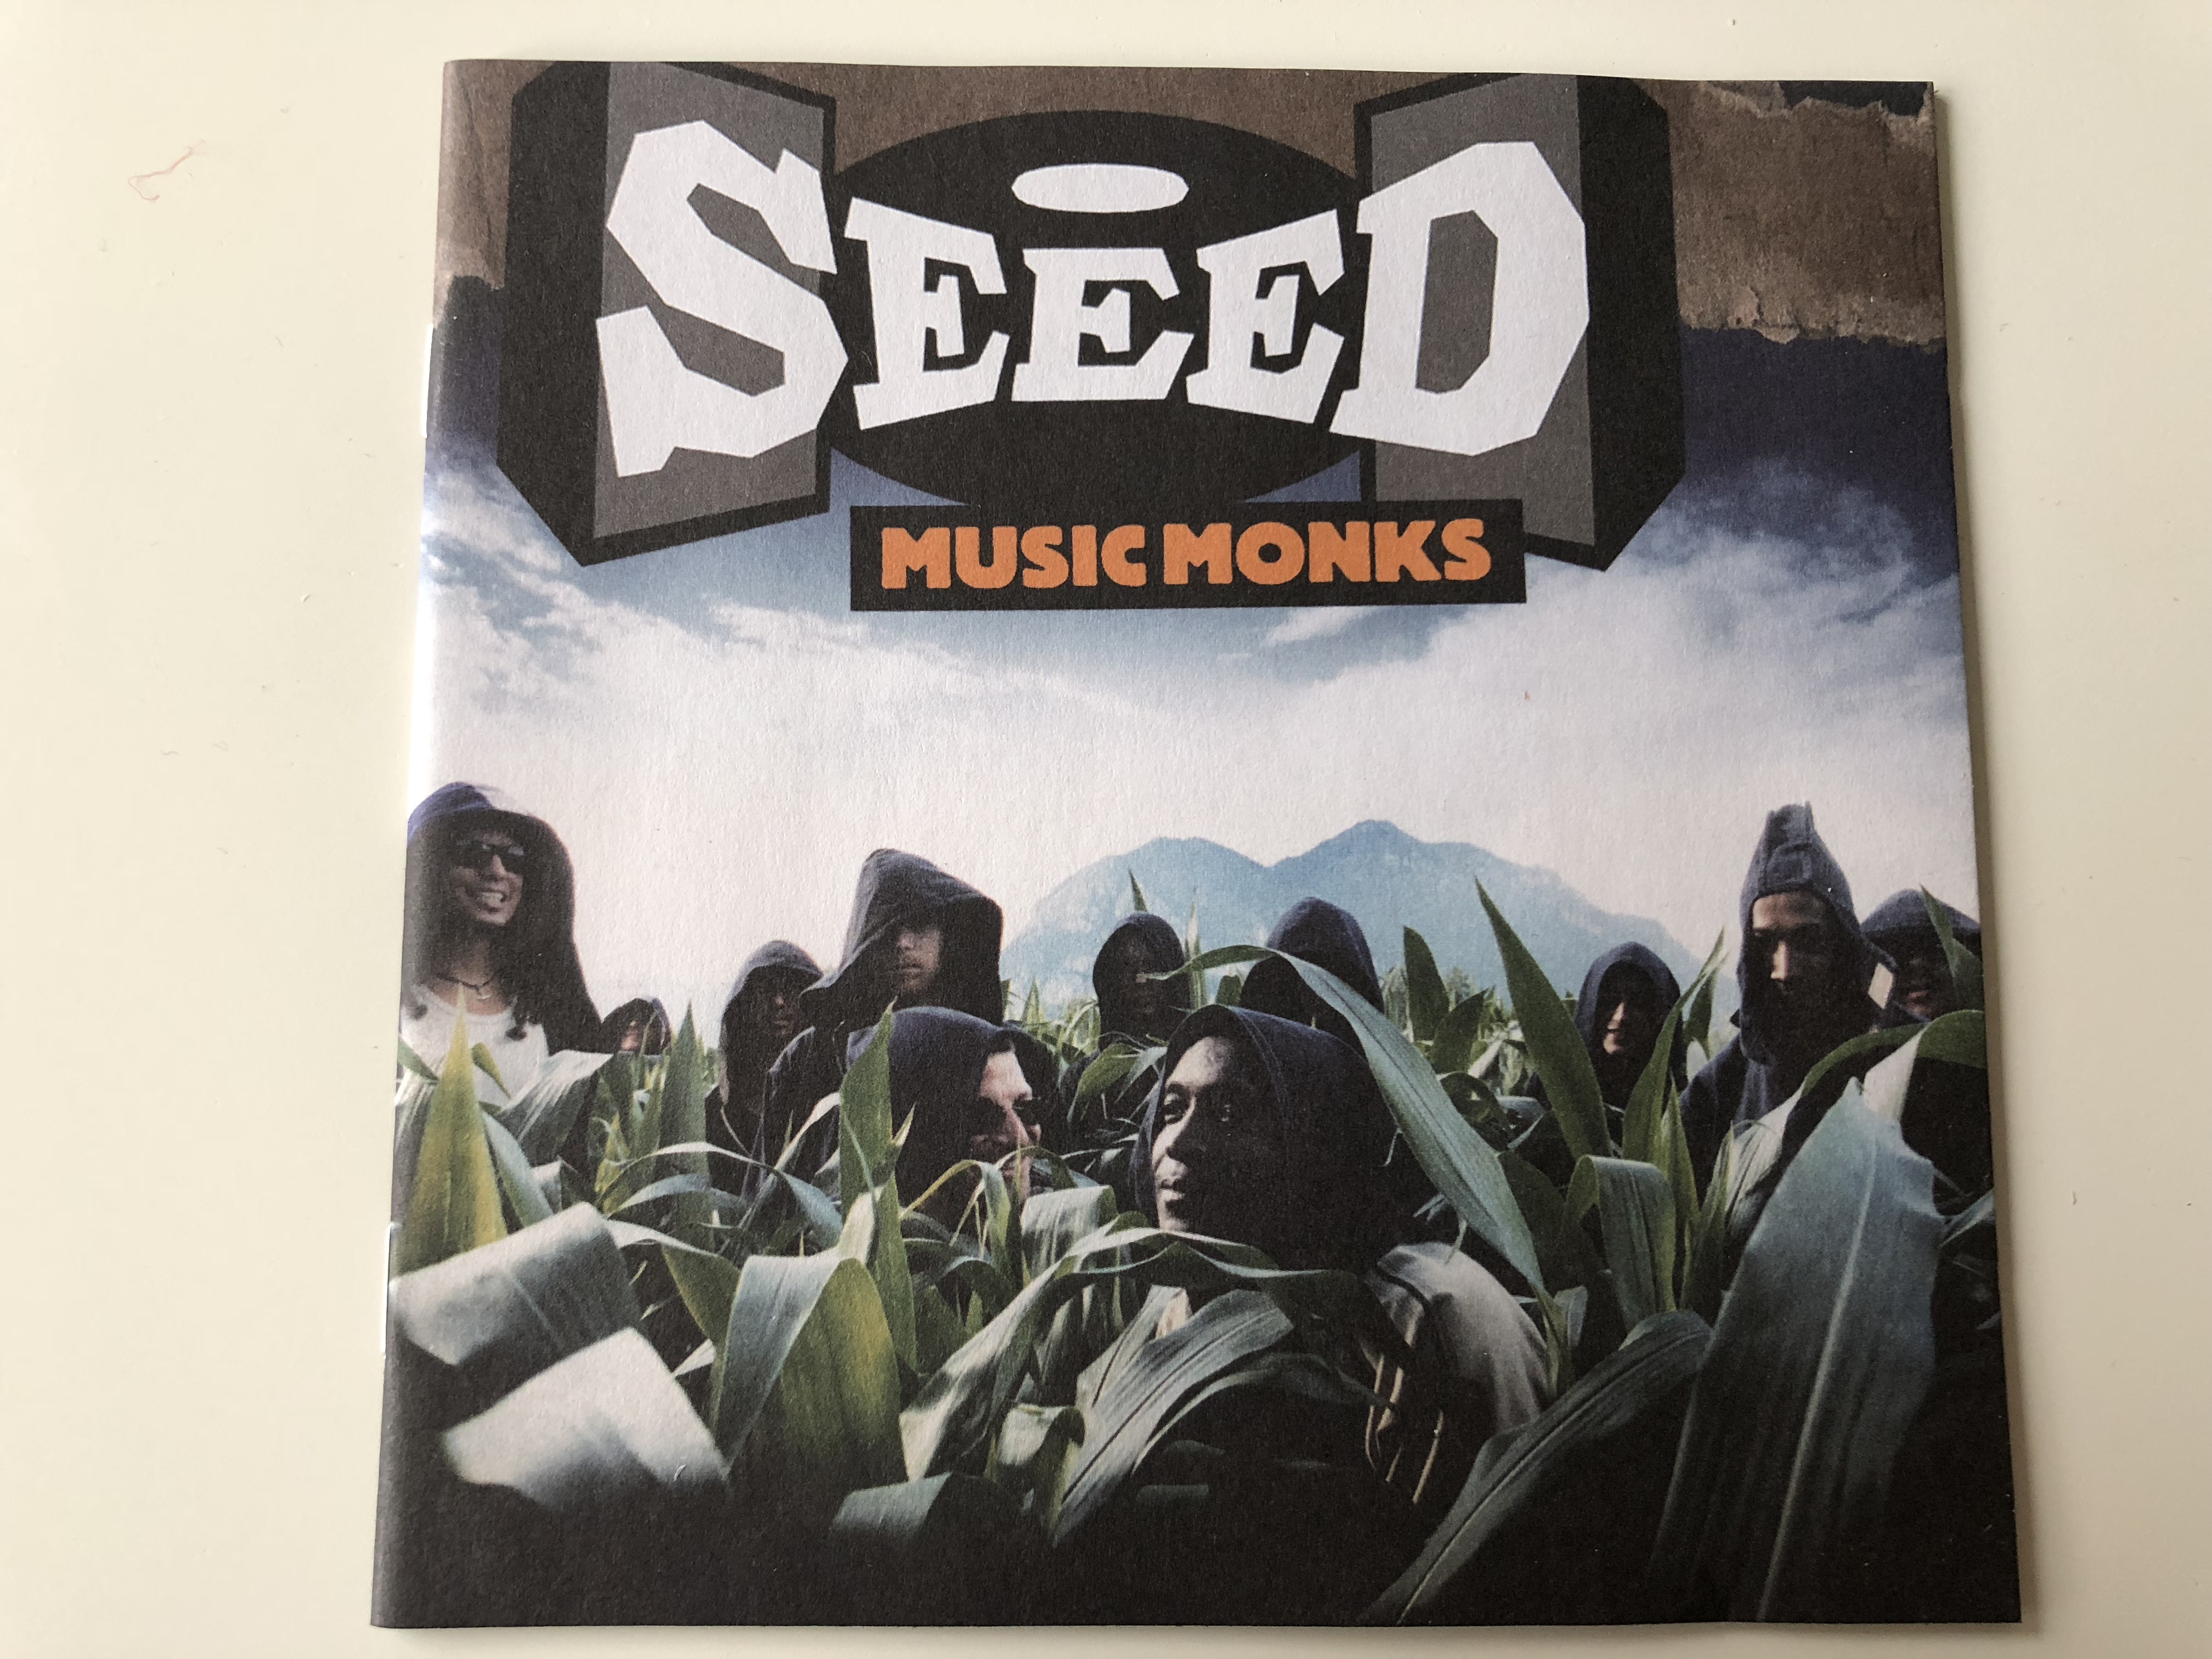 seed-music-monks-what-you-desereve-is-what-you-get-pressure-goldmine-fire-in-the-morning-audio-cd-2004-downbeat-records-1-.jpg